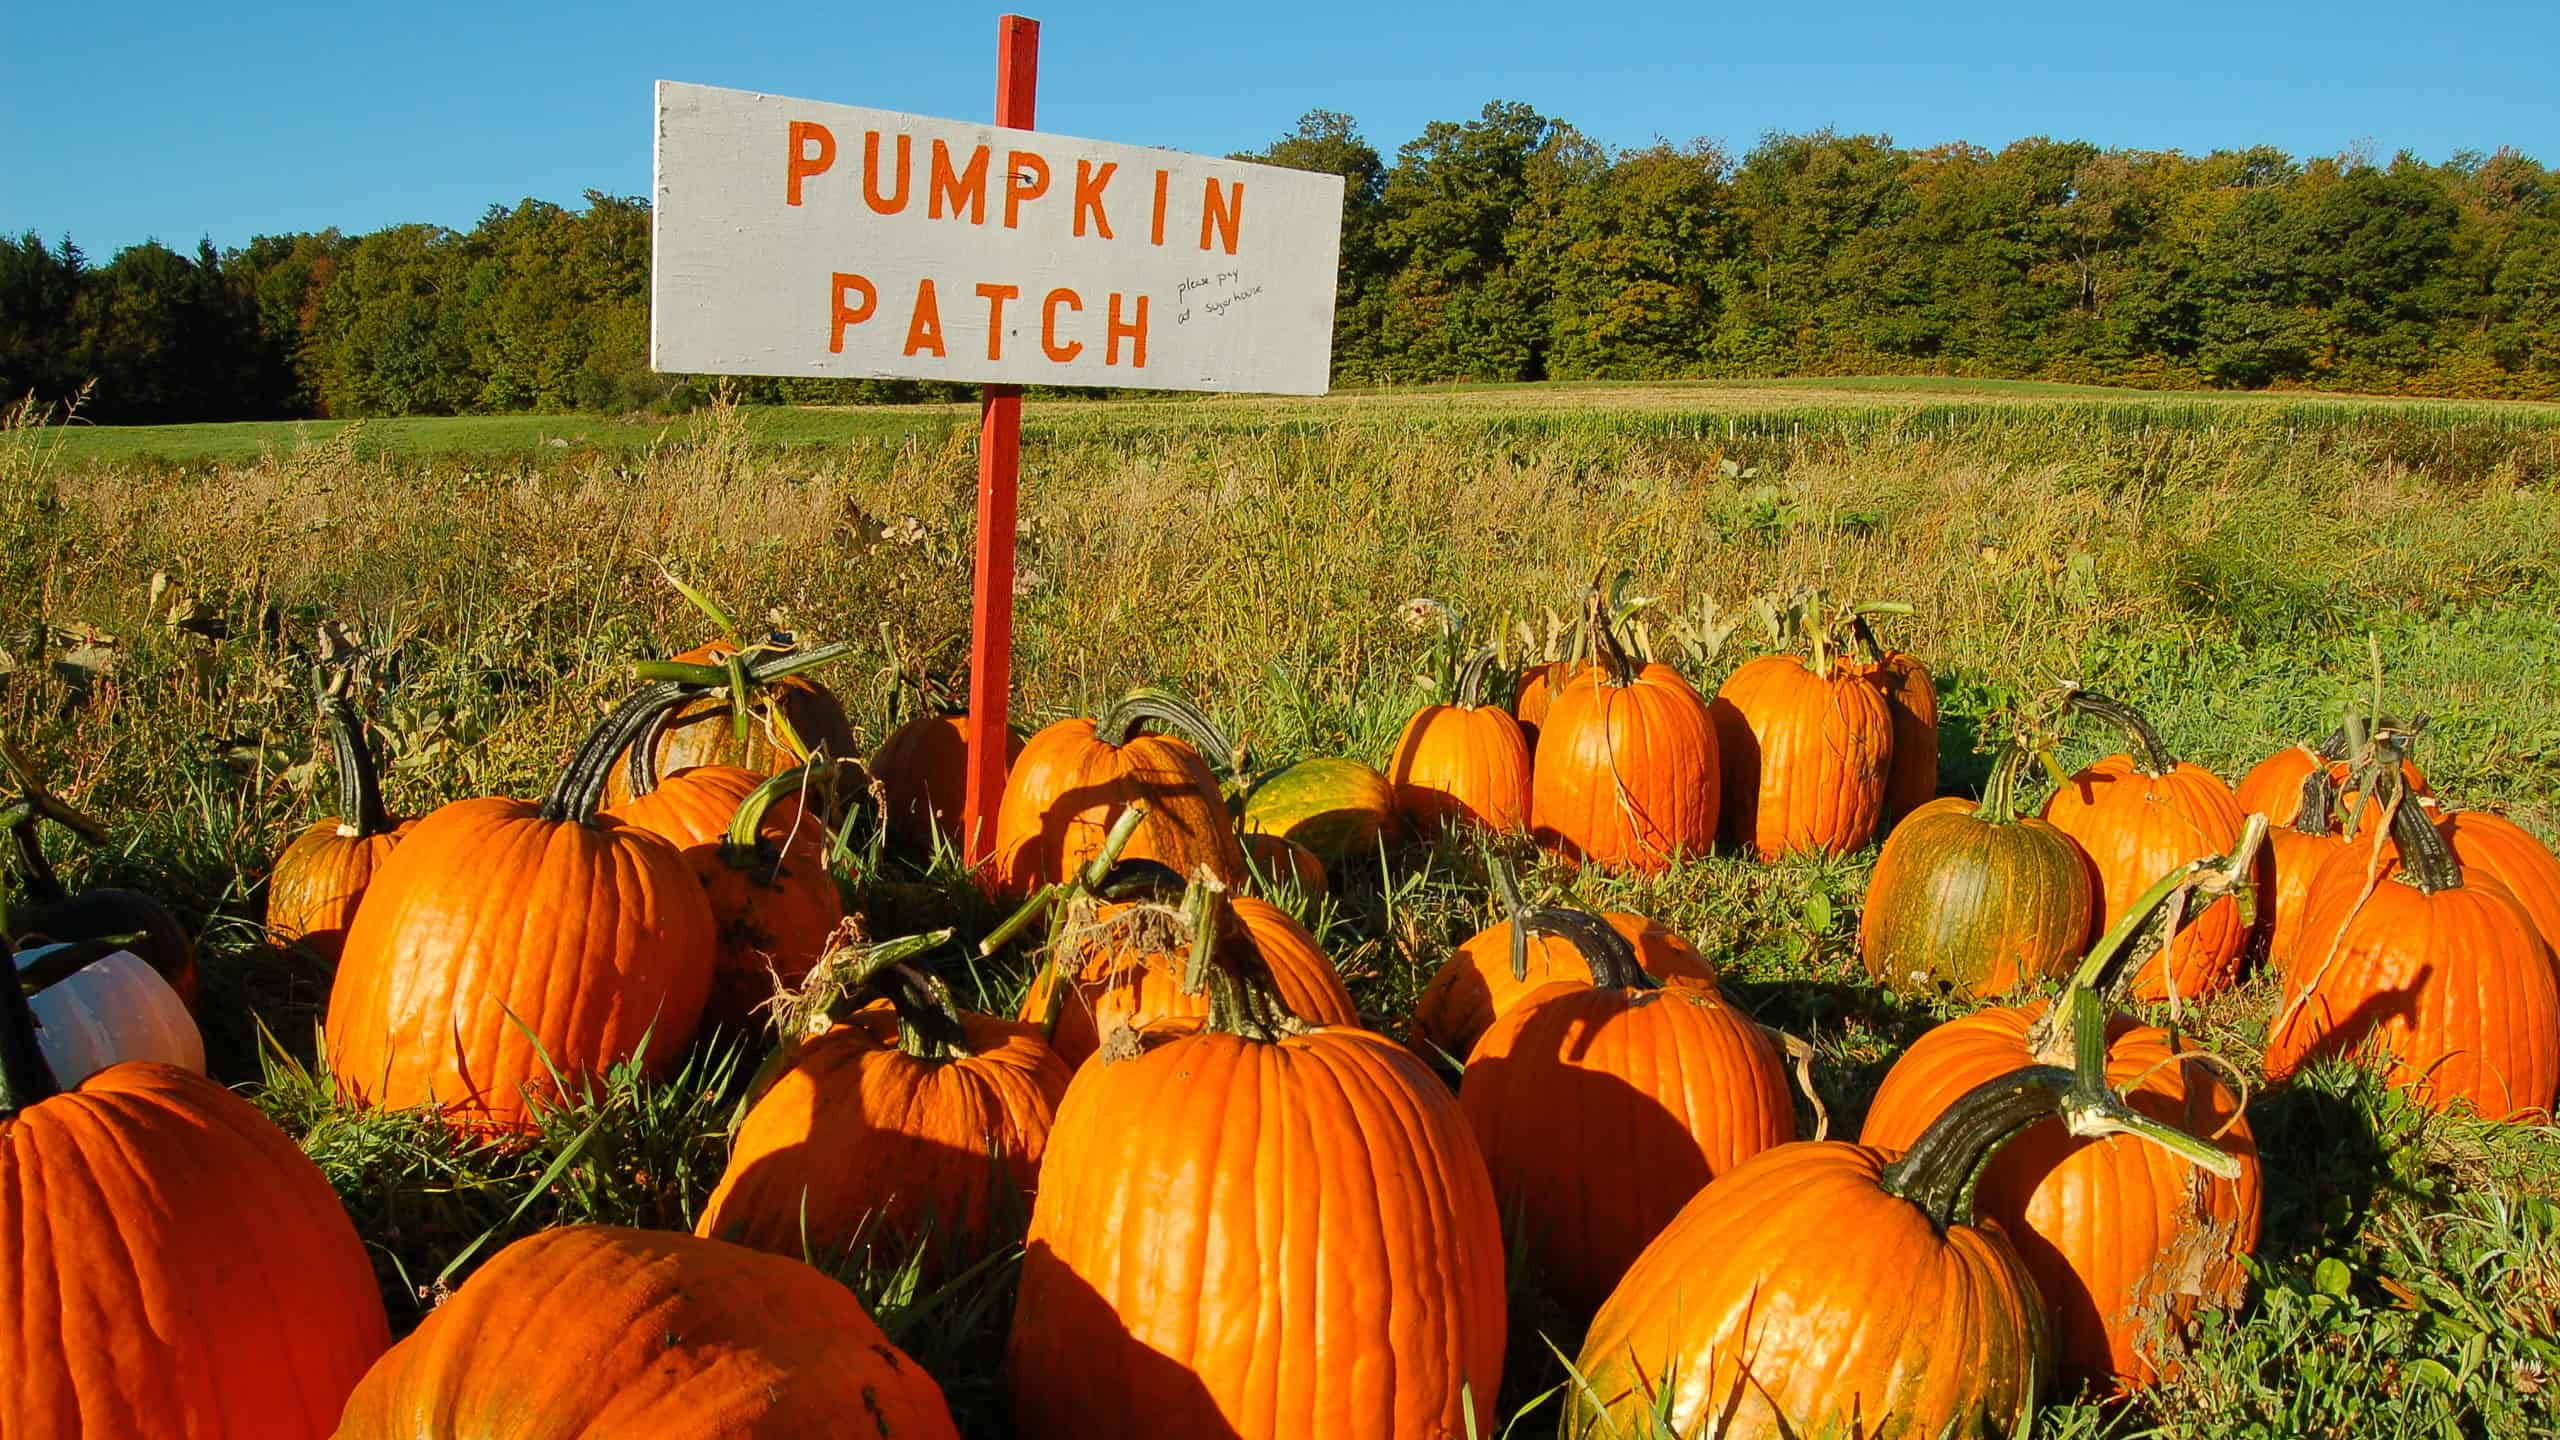 Approximately 20 mature orange pumpkins are visible grouped around a white sign with orange letters that says " PUMPKIN PATCH." Grass surrounds the group.